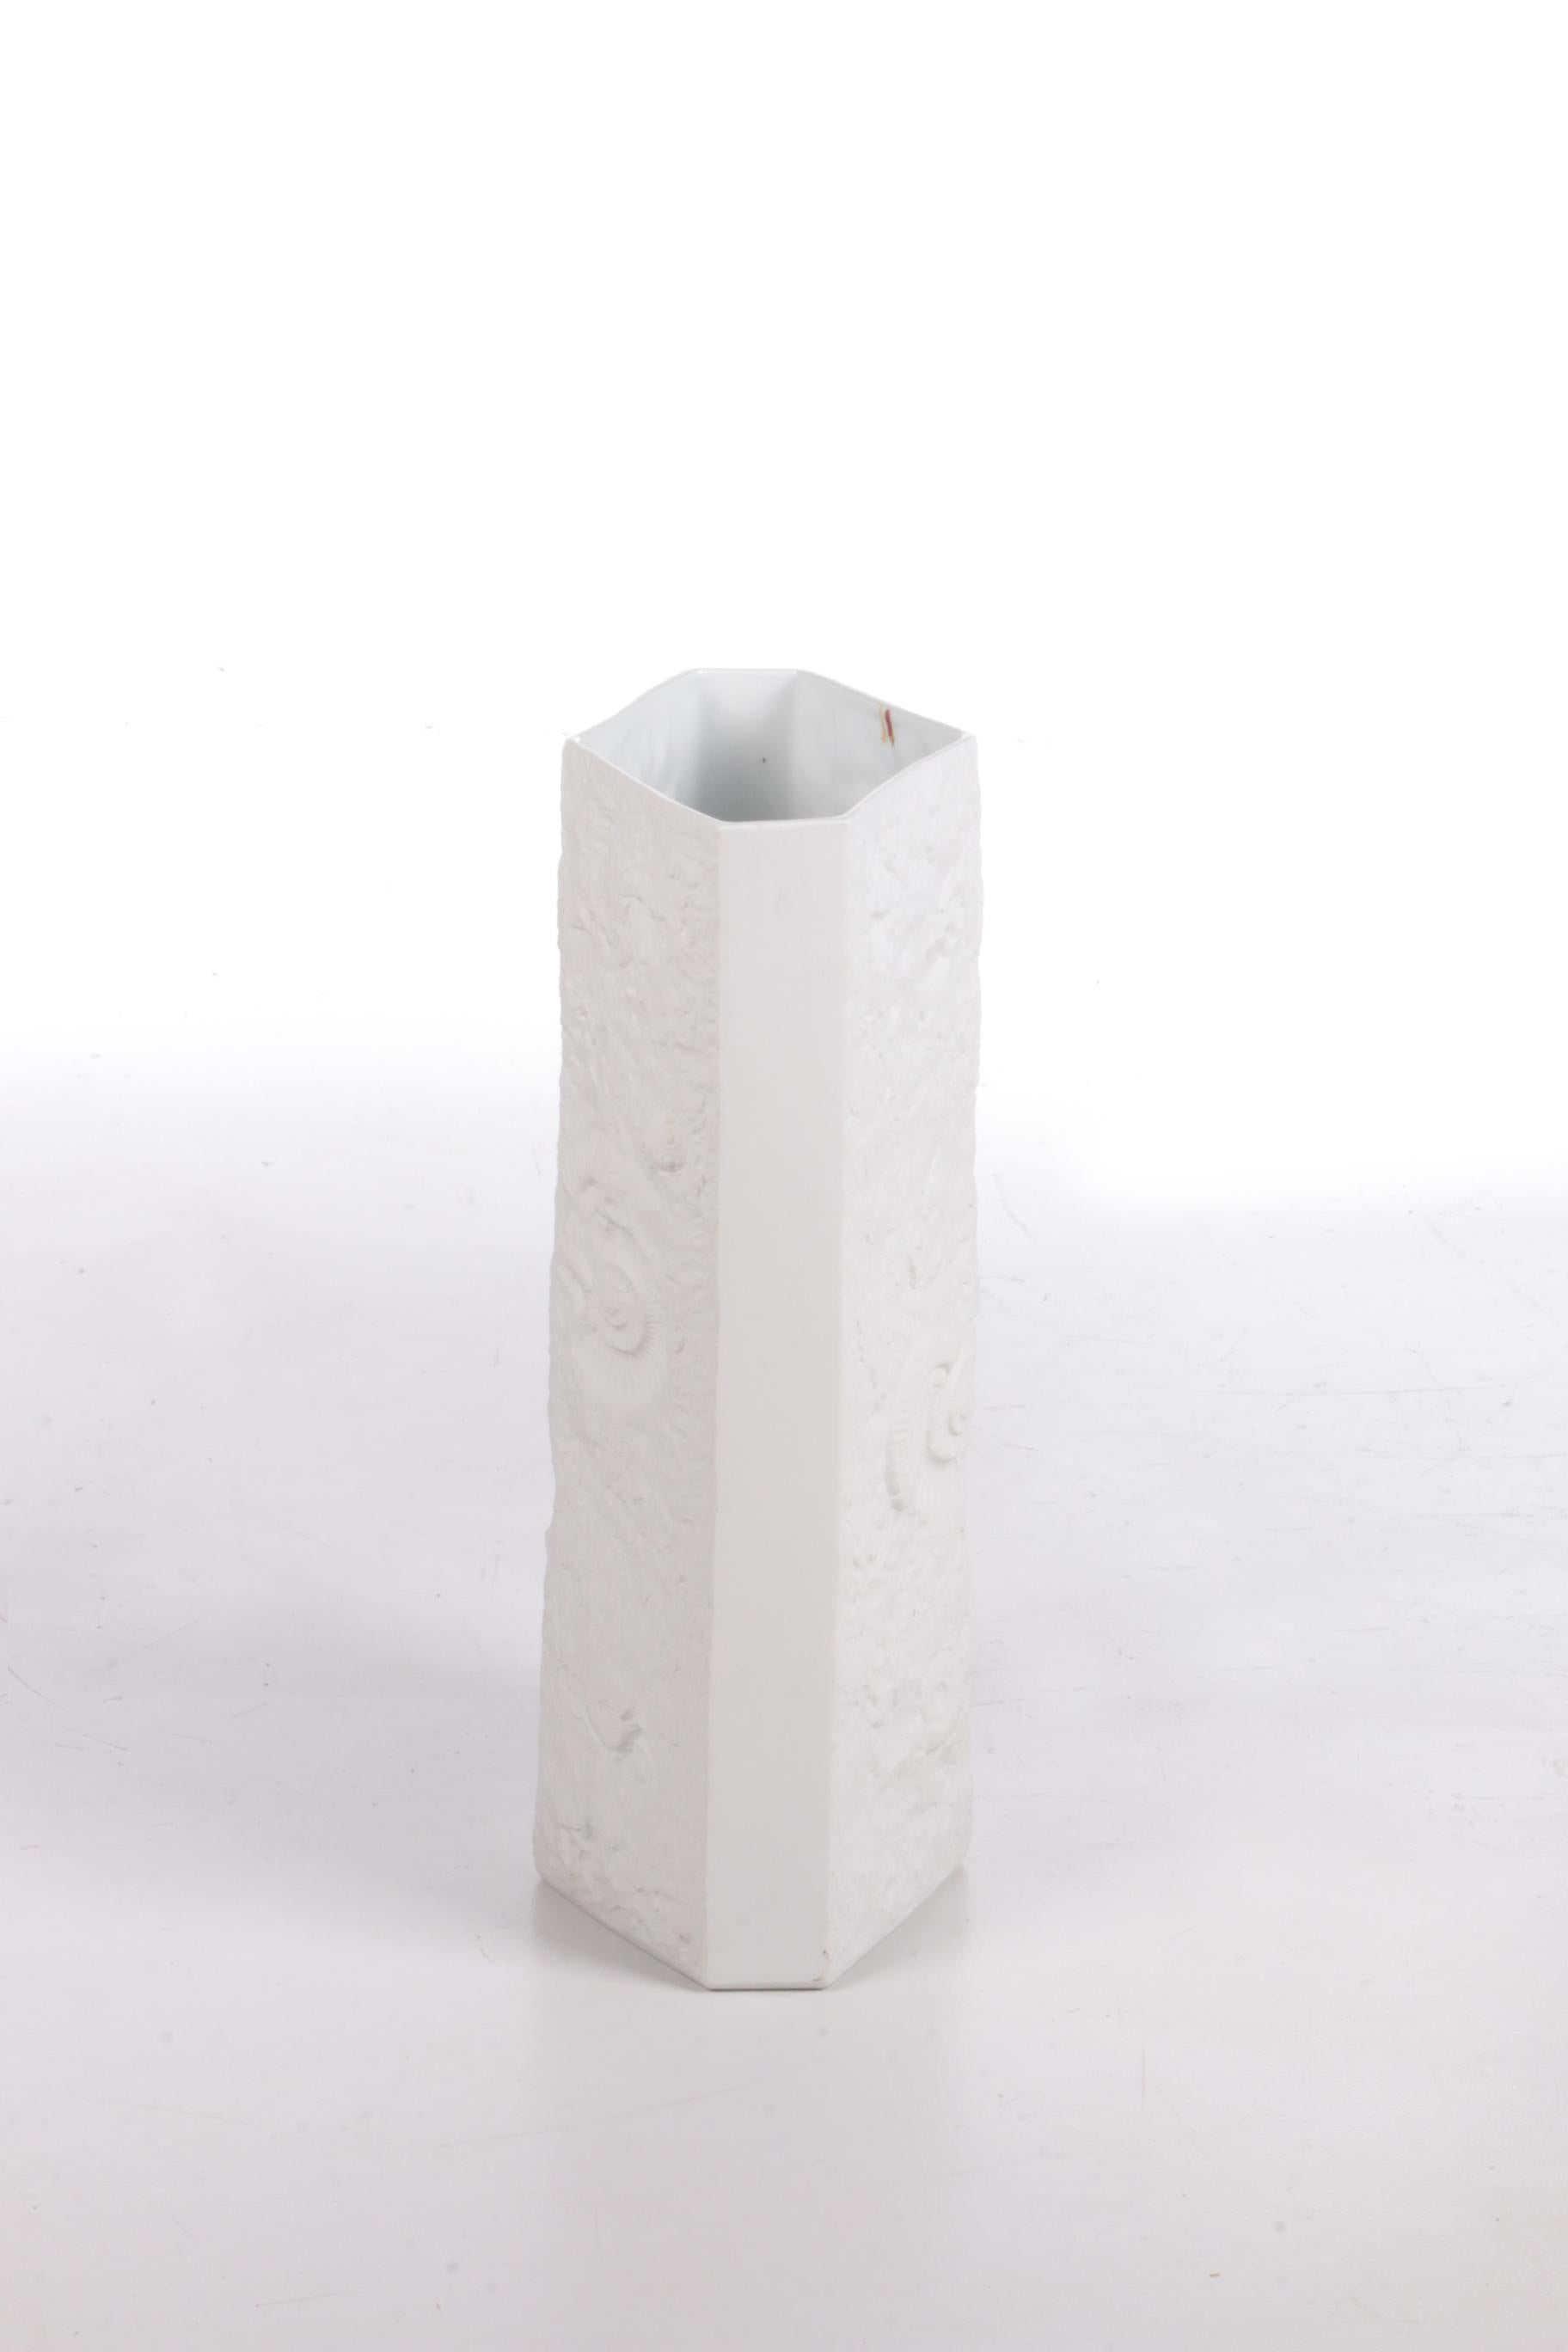 Modern Large AK Kaiser Porcelain Vase with a White Shell Fossil Pattern